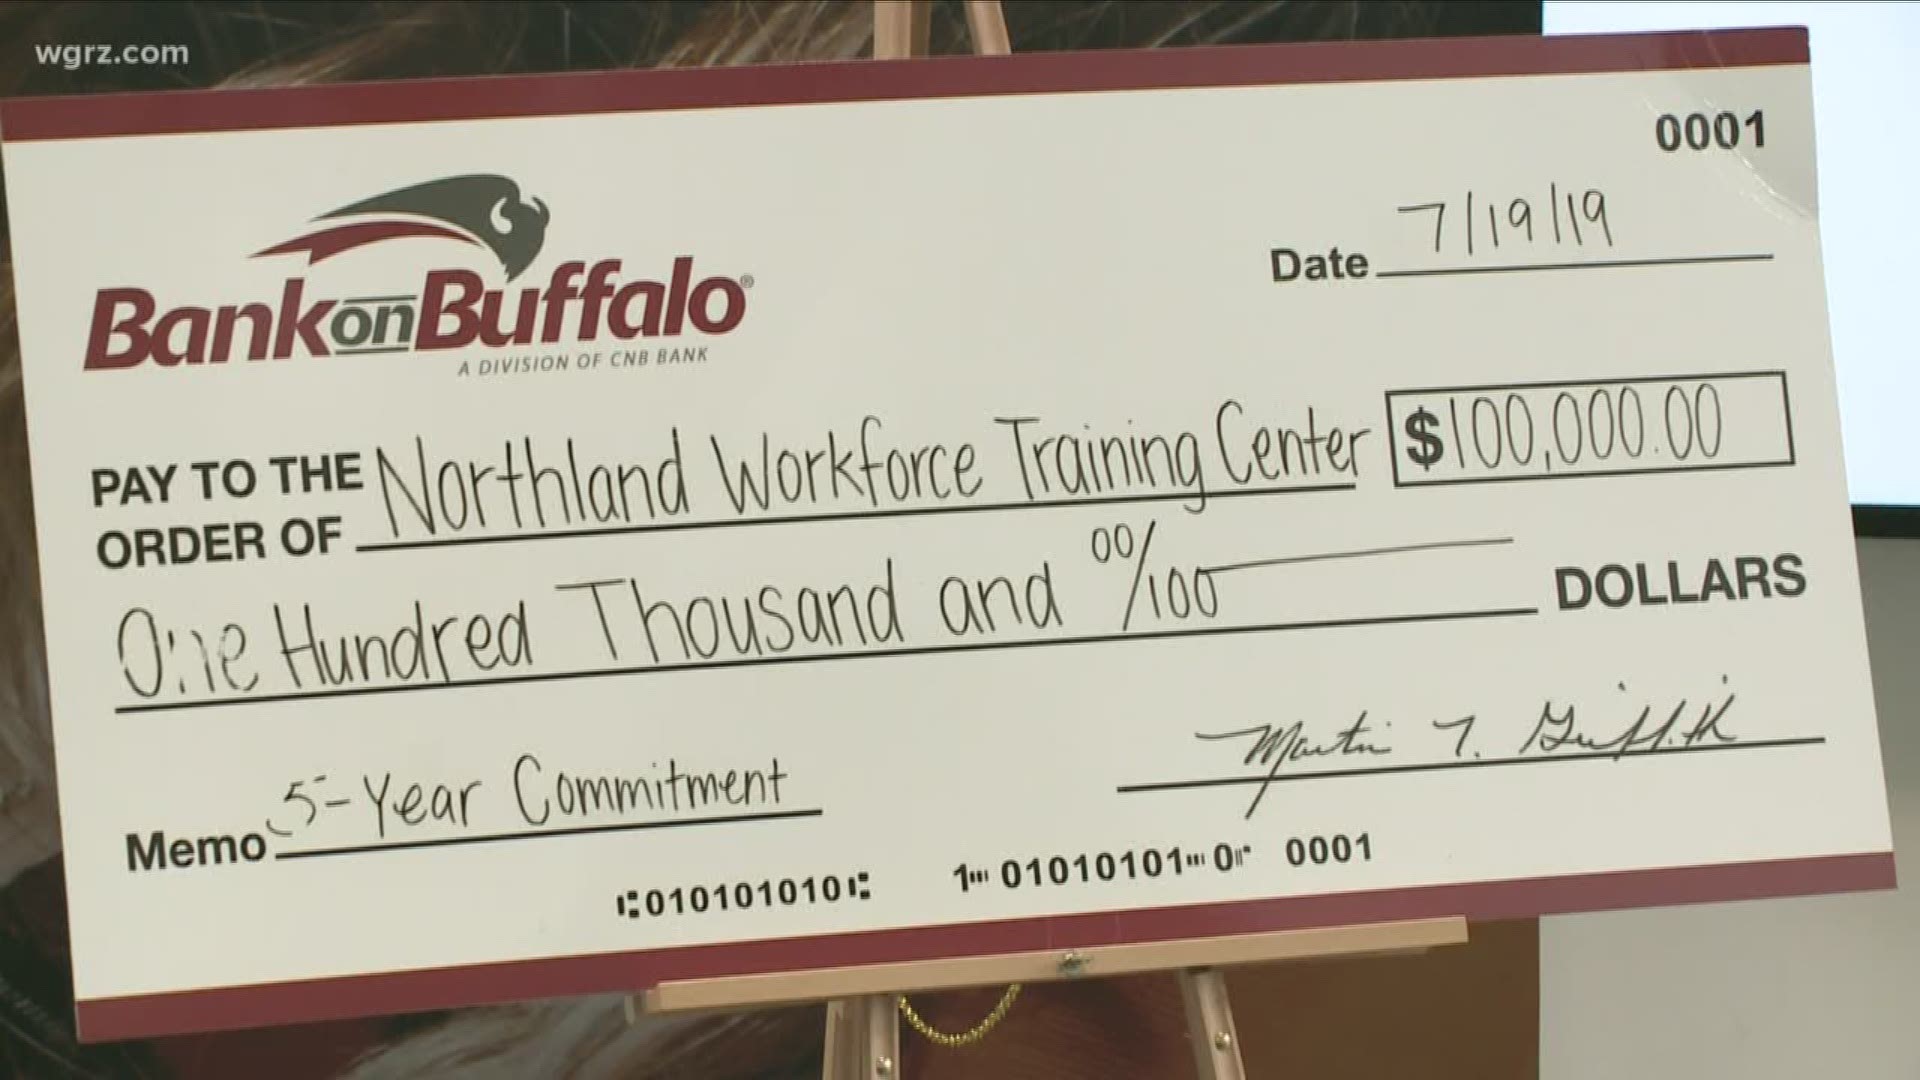 Bank on Buffalo will be donating $100,000 to go towards tuition assistance, operational needs, and more for people at the center.